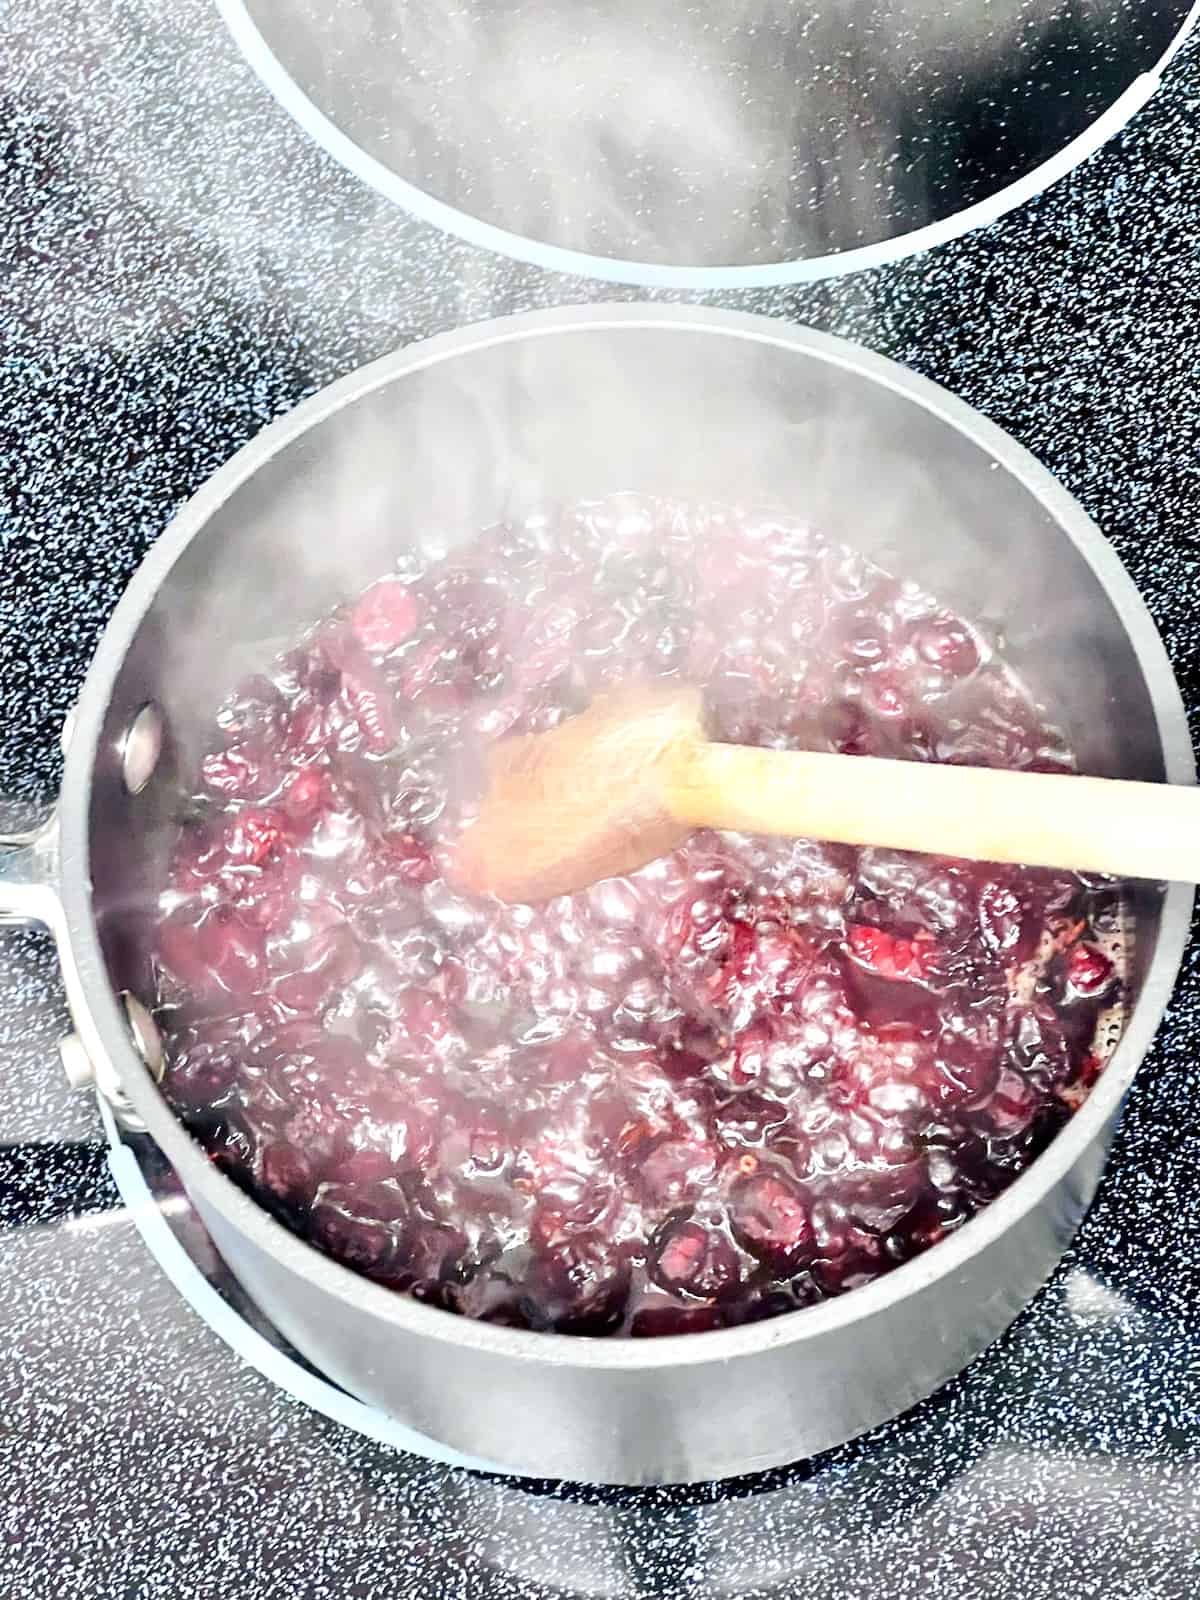 Cranberry Sauce from Dried Cranberries Dried cranberries and ingredients boiling in a pot on the stove..